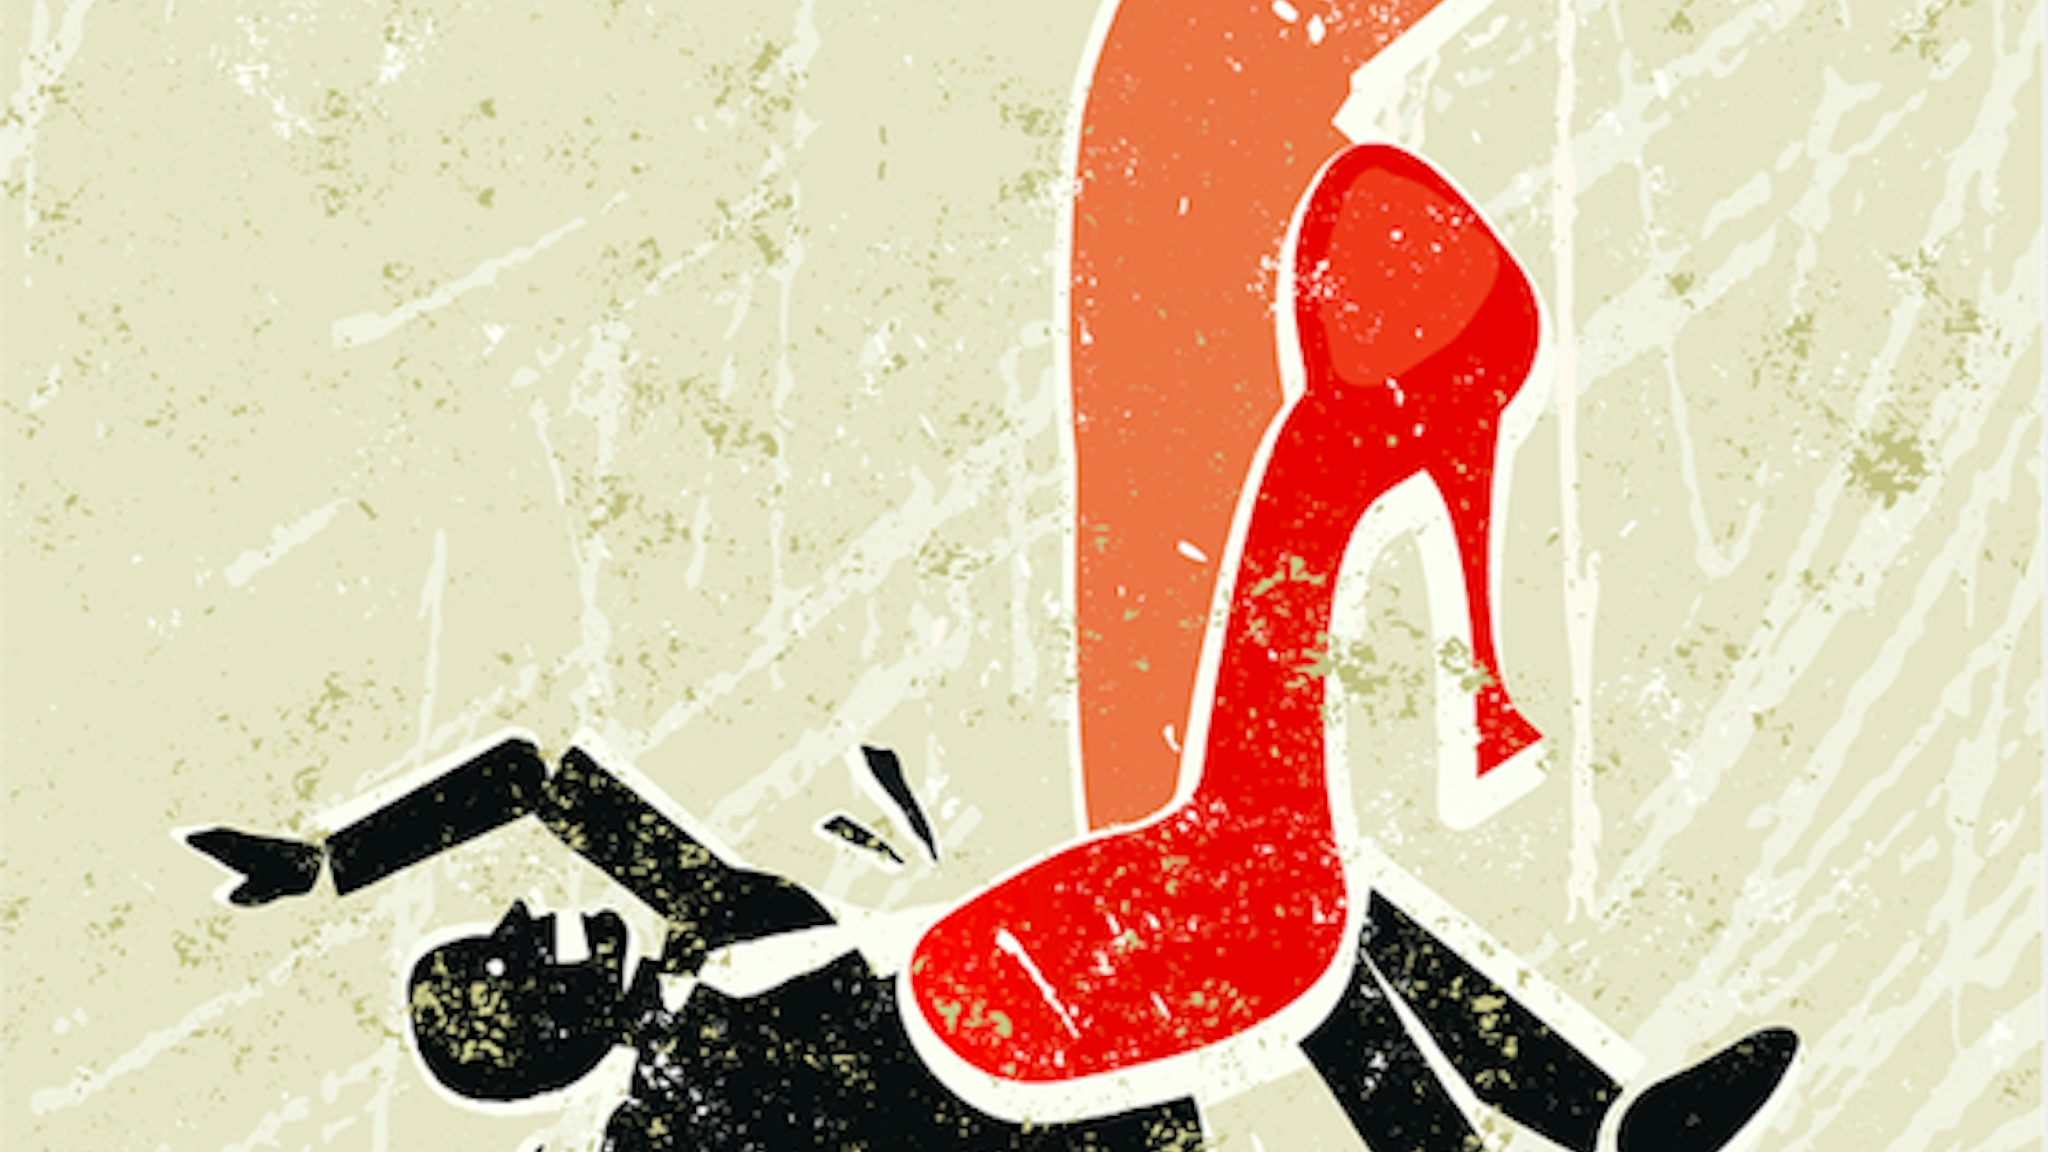 A stylized vector cartoon of a beautiful woman's leg crushing a man under her very high red heels,reminiscent of an old screen print poster and suggesting battle of the sexes, relationship issues, seduction, and putting your foot down.